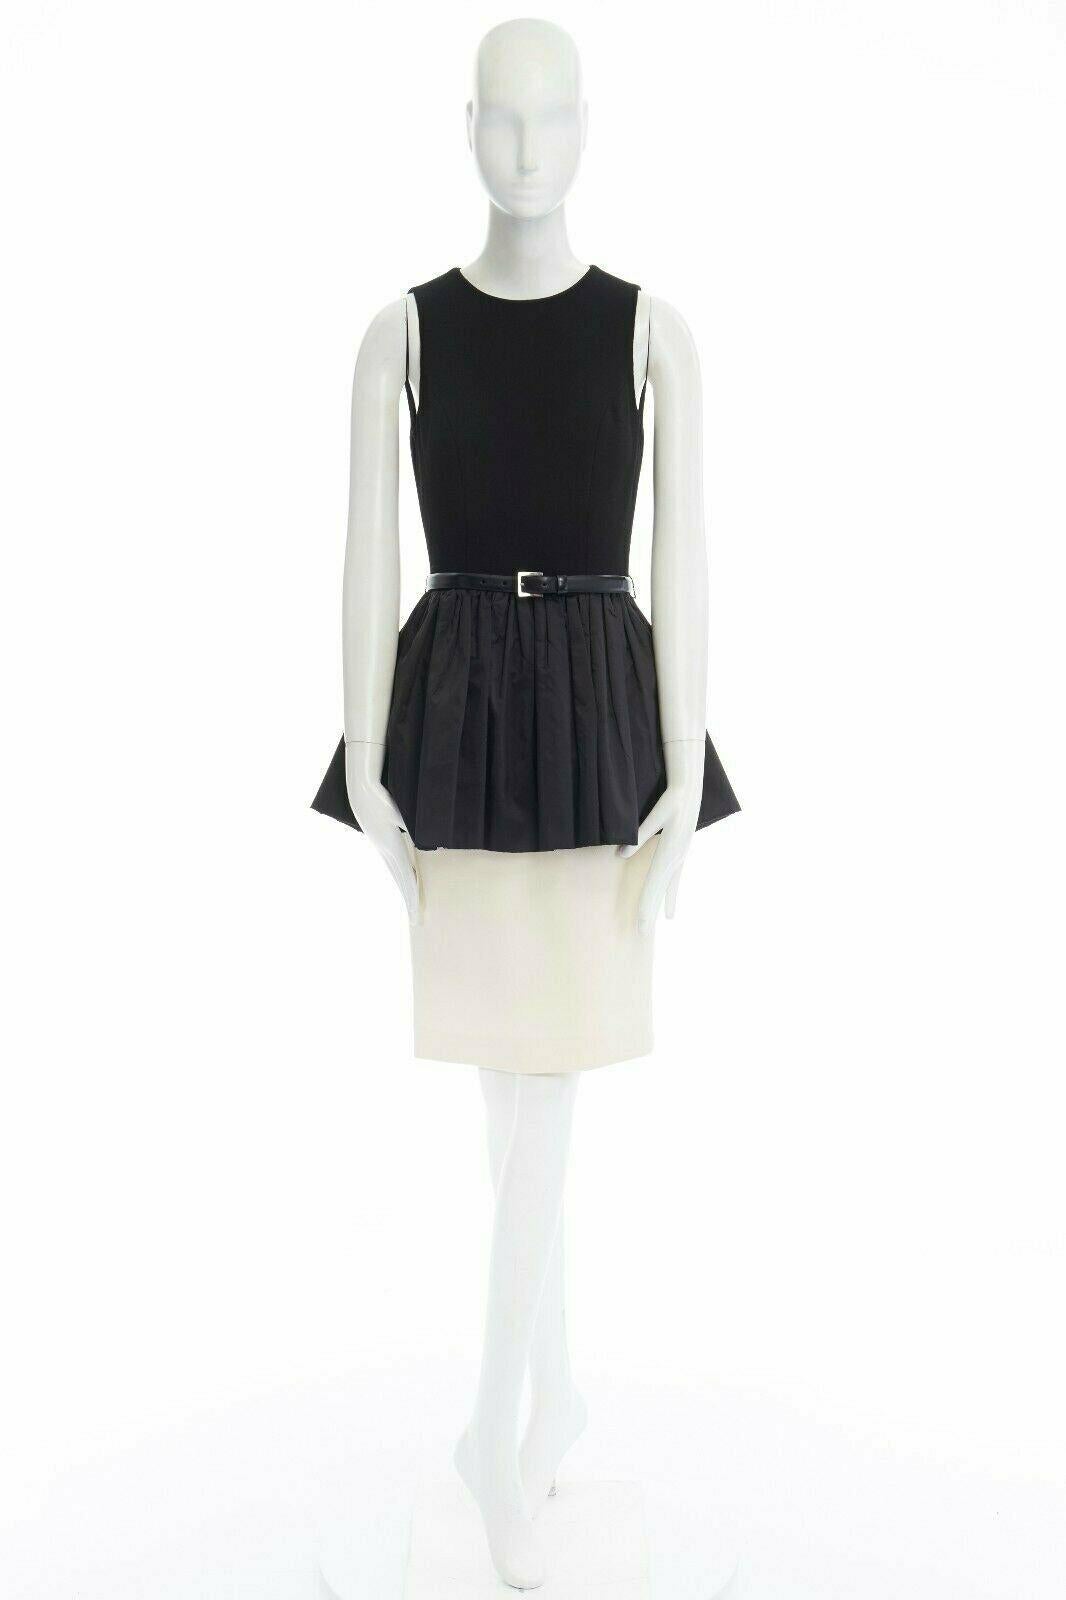 MICHAEL KORS COLLECTION black leather belted peplum white skirt dress US2 XS 
Reference: LNKO/A00691 
Brand: Michael Kors 
Material: Virgin Wool 
Color: Black 
Pattern: Solid 
Closure: Zip 
Extra Detail: Virgin wool, spandex, rayon, polyester. Black